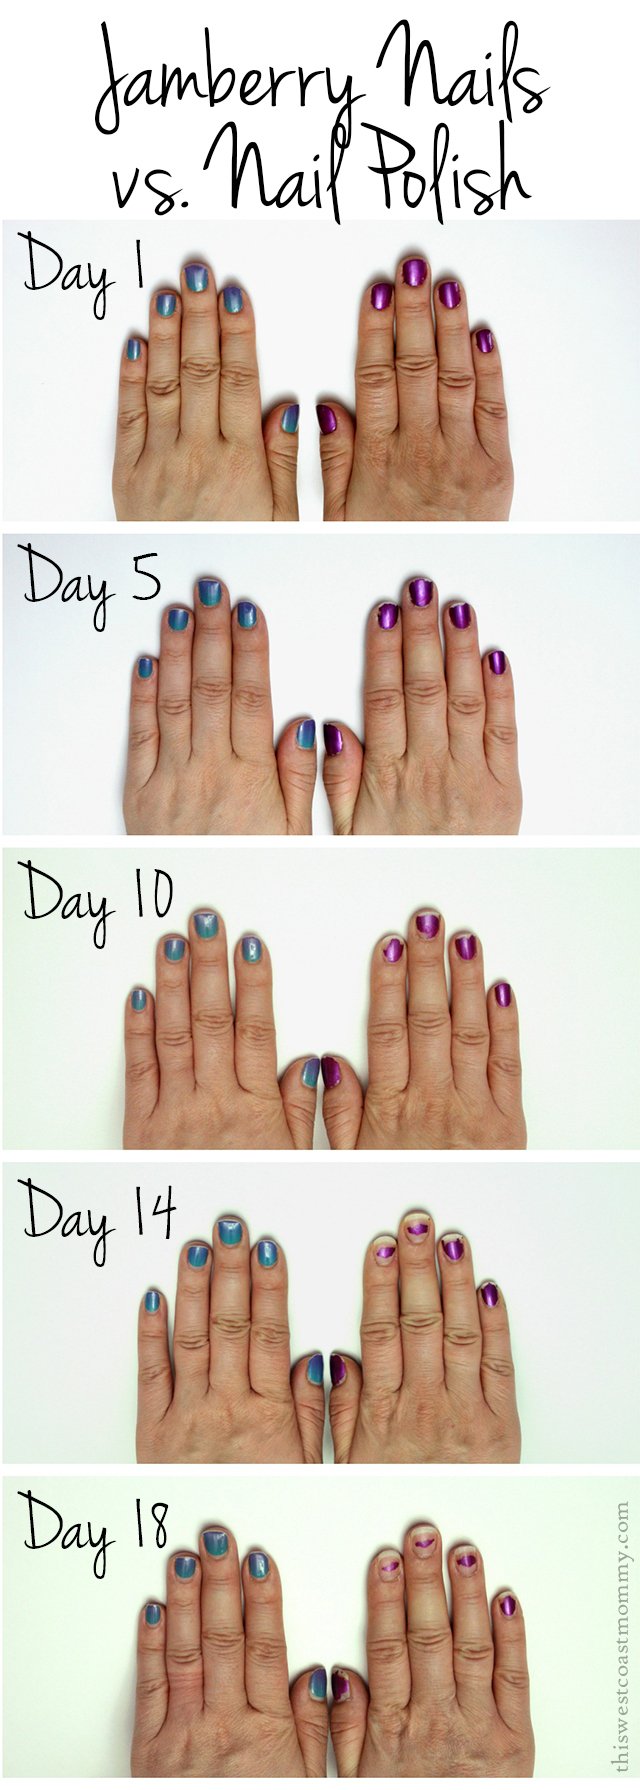 How do Jamberry Nails hold up compared to nail polish over 18 days?